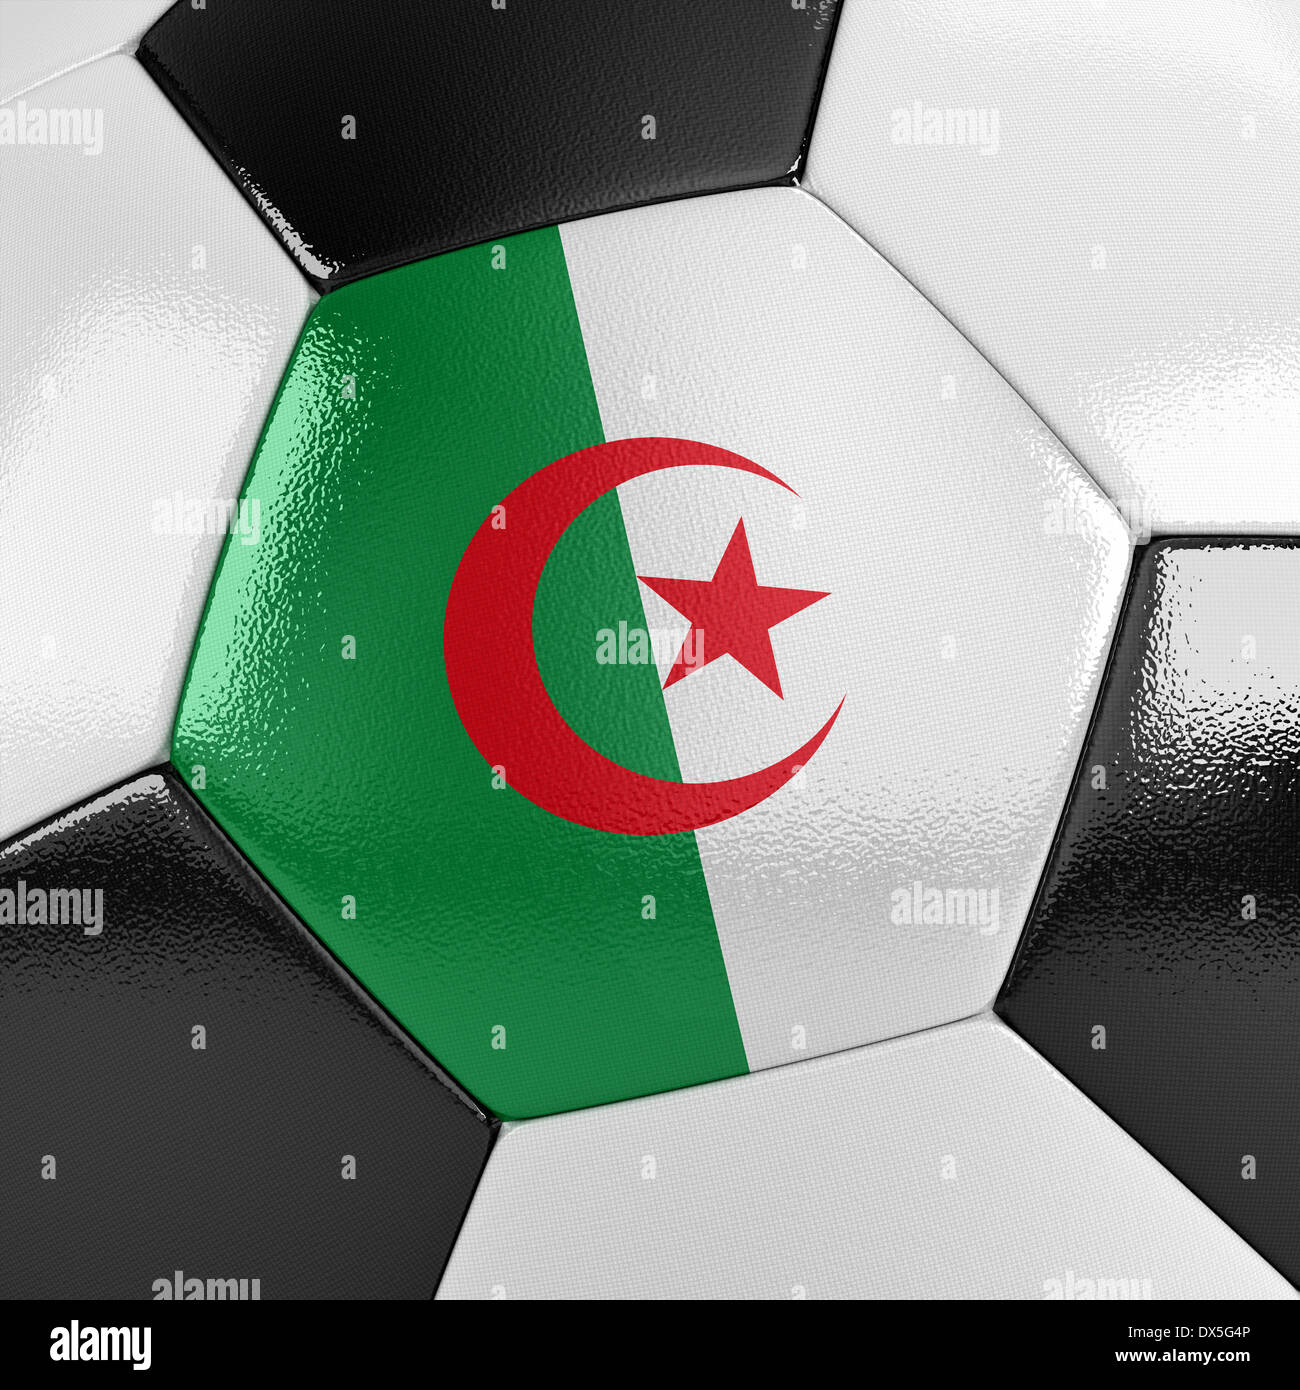 Close up view of a soccer ball with the Algerian flag on it Stock Photo